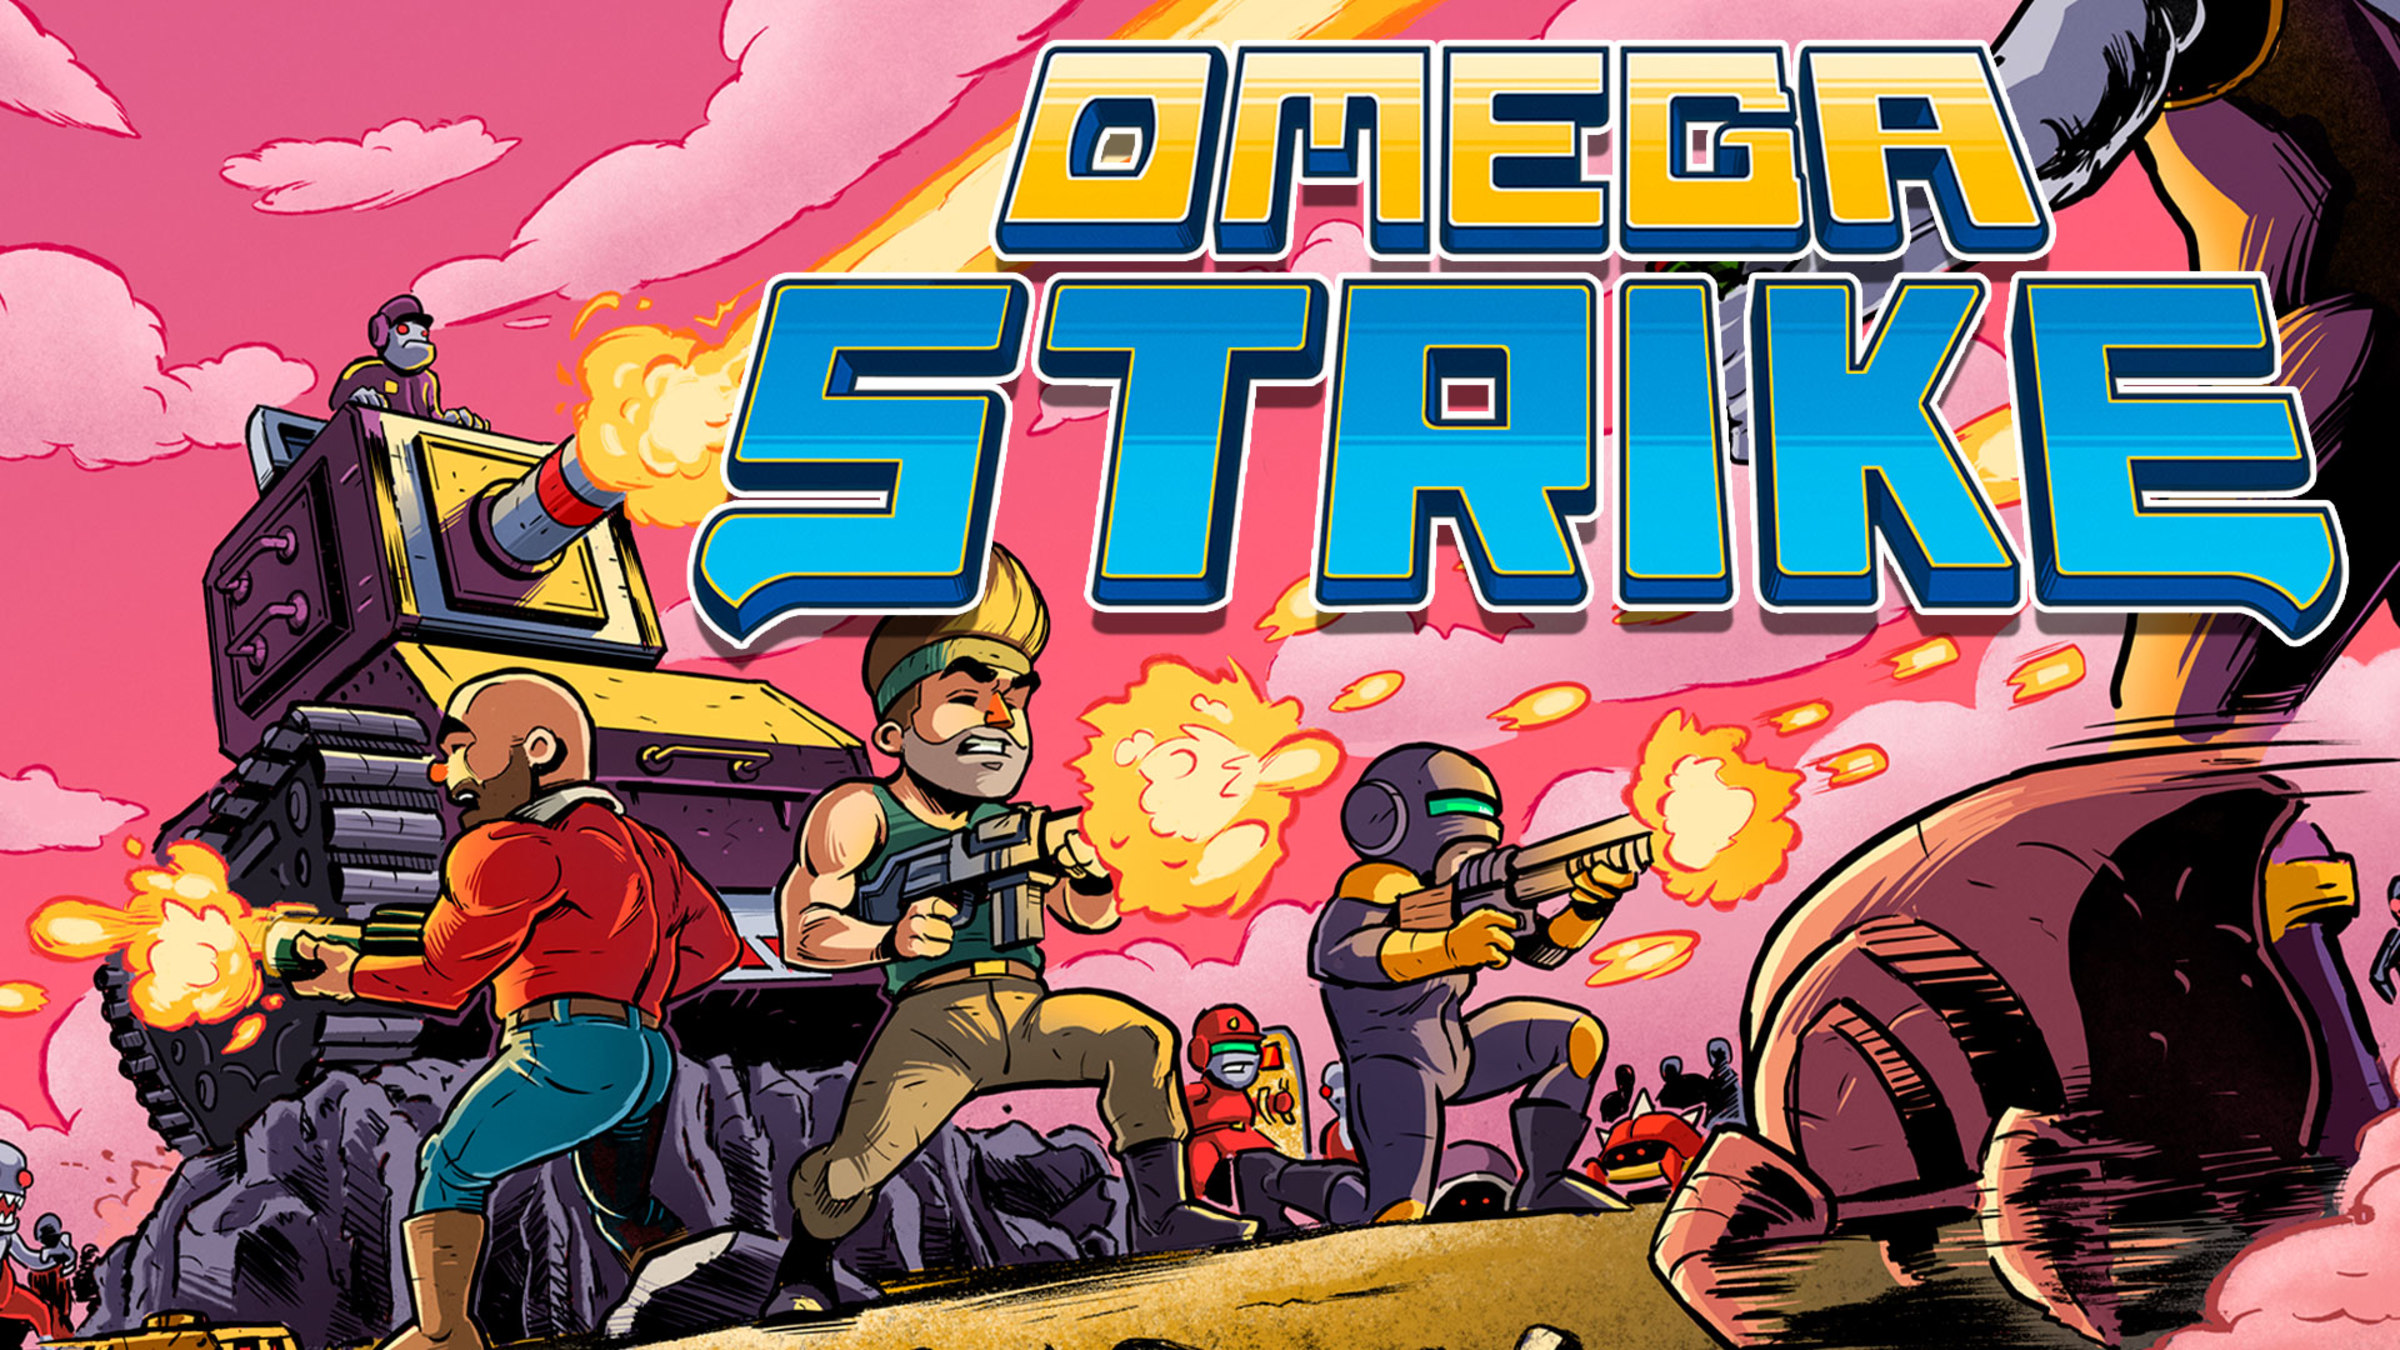 Is Omega Strikers playable on any cloud gaming services?